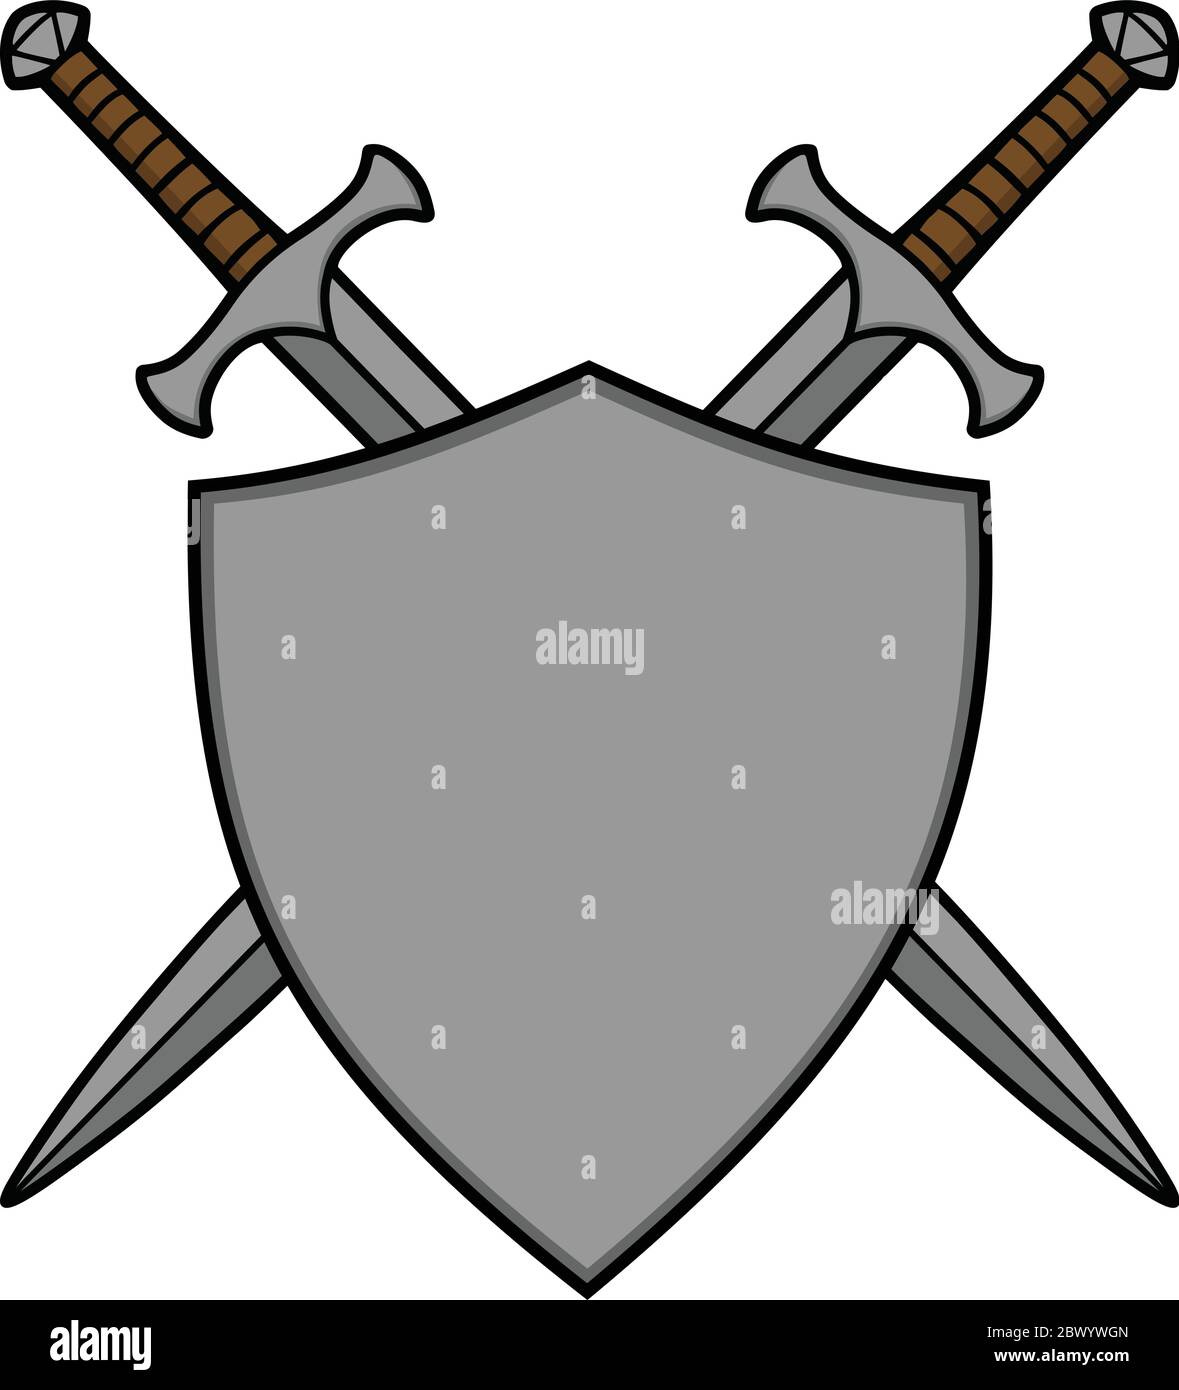 Crossed Swords and Shield- An Illustration of Crossed Swords and Shield. Stock Vector